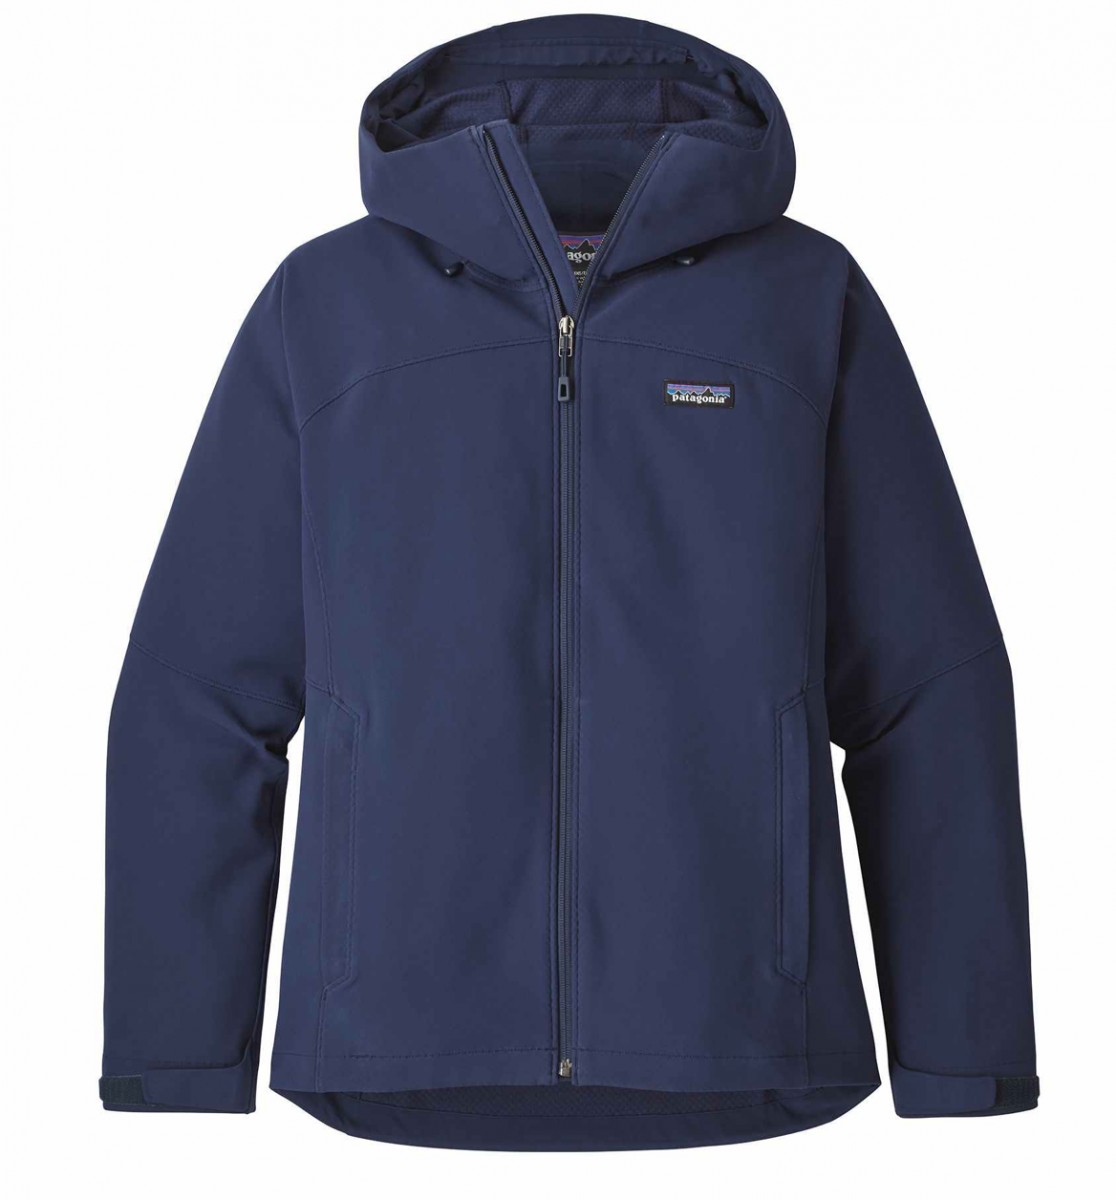 Patagonia Adze Hoody - Women's Review | Tested